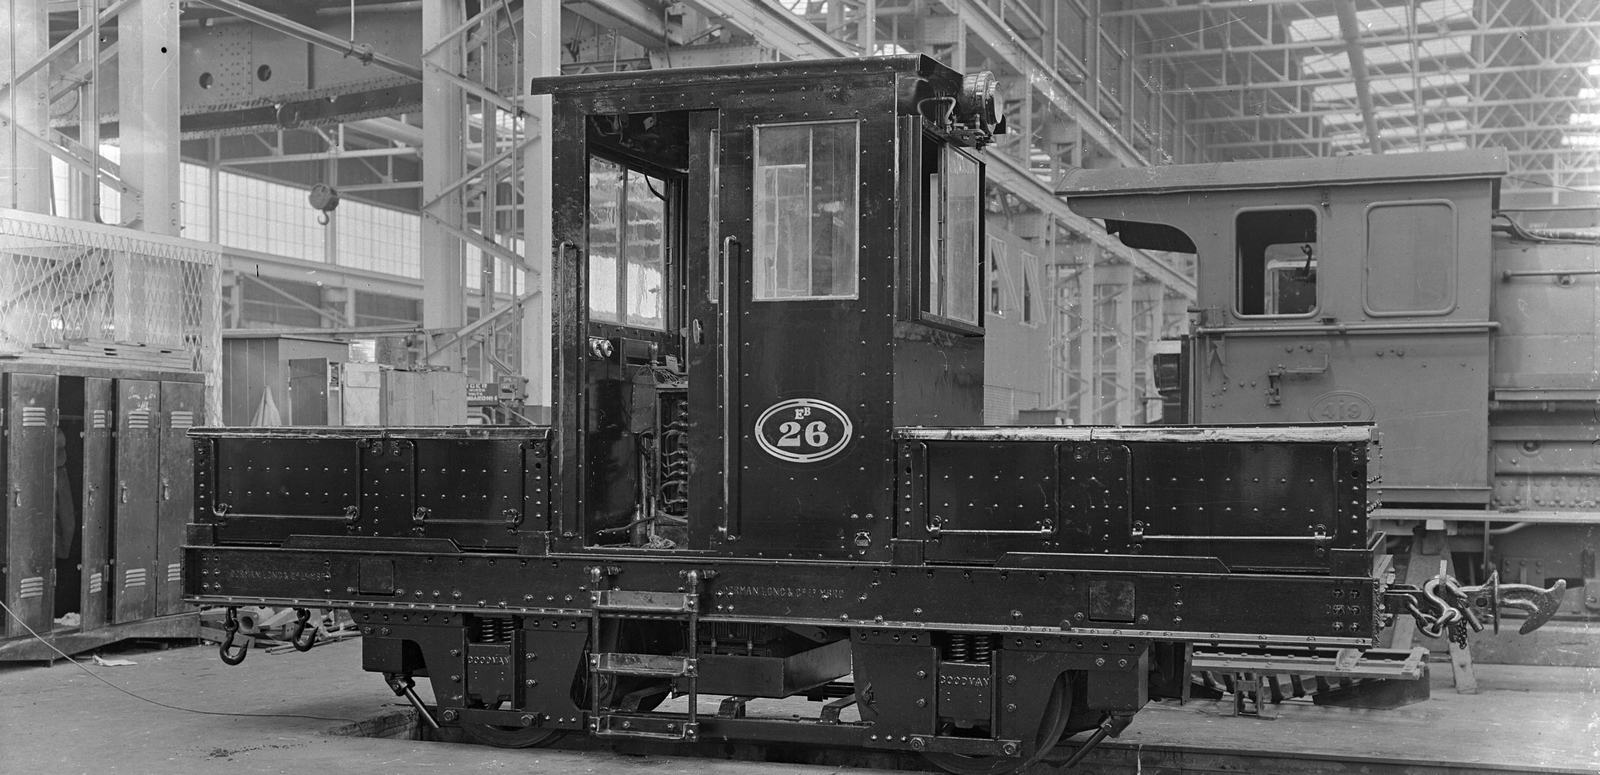 No. 26 in 1930 at the workshop in Woburn, Lower Hutt